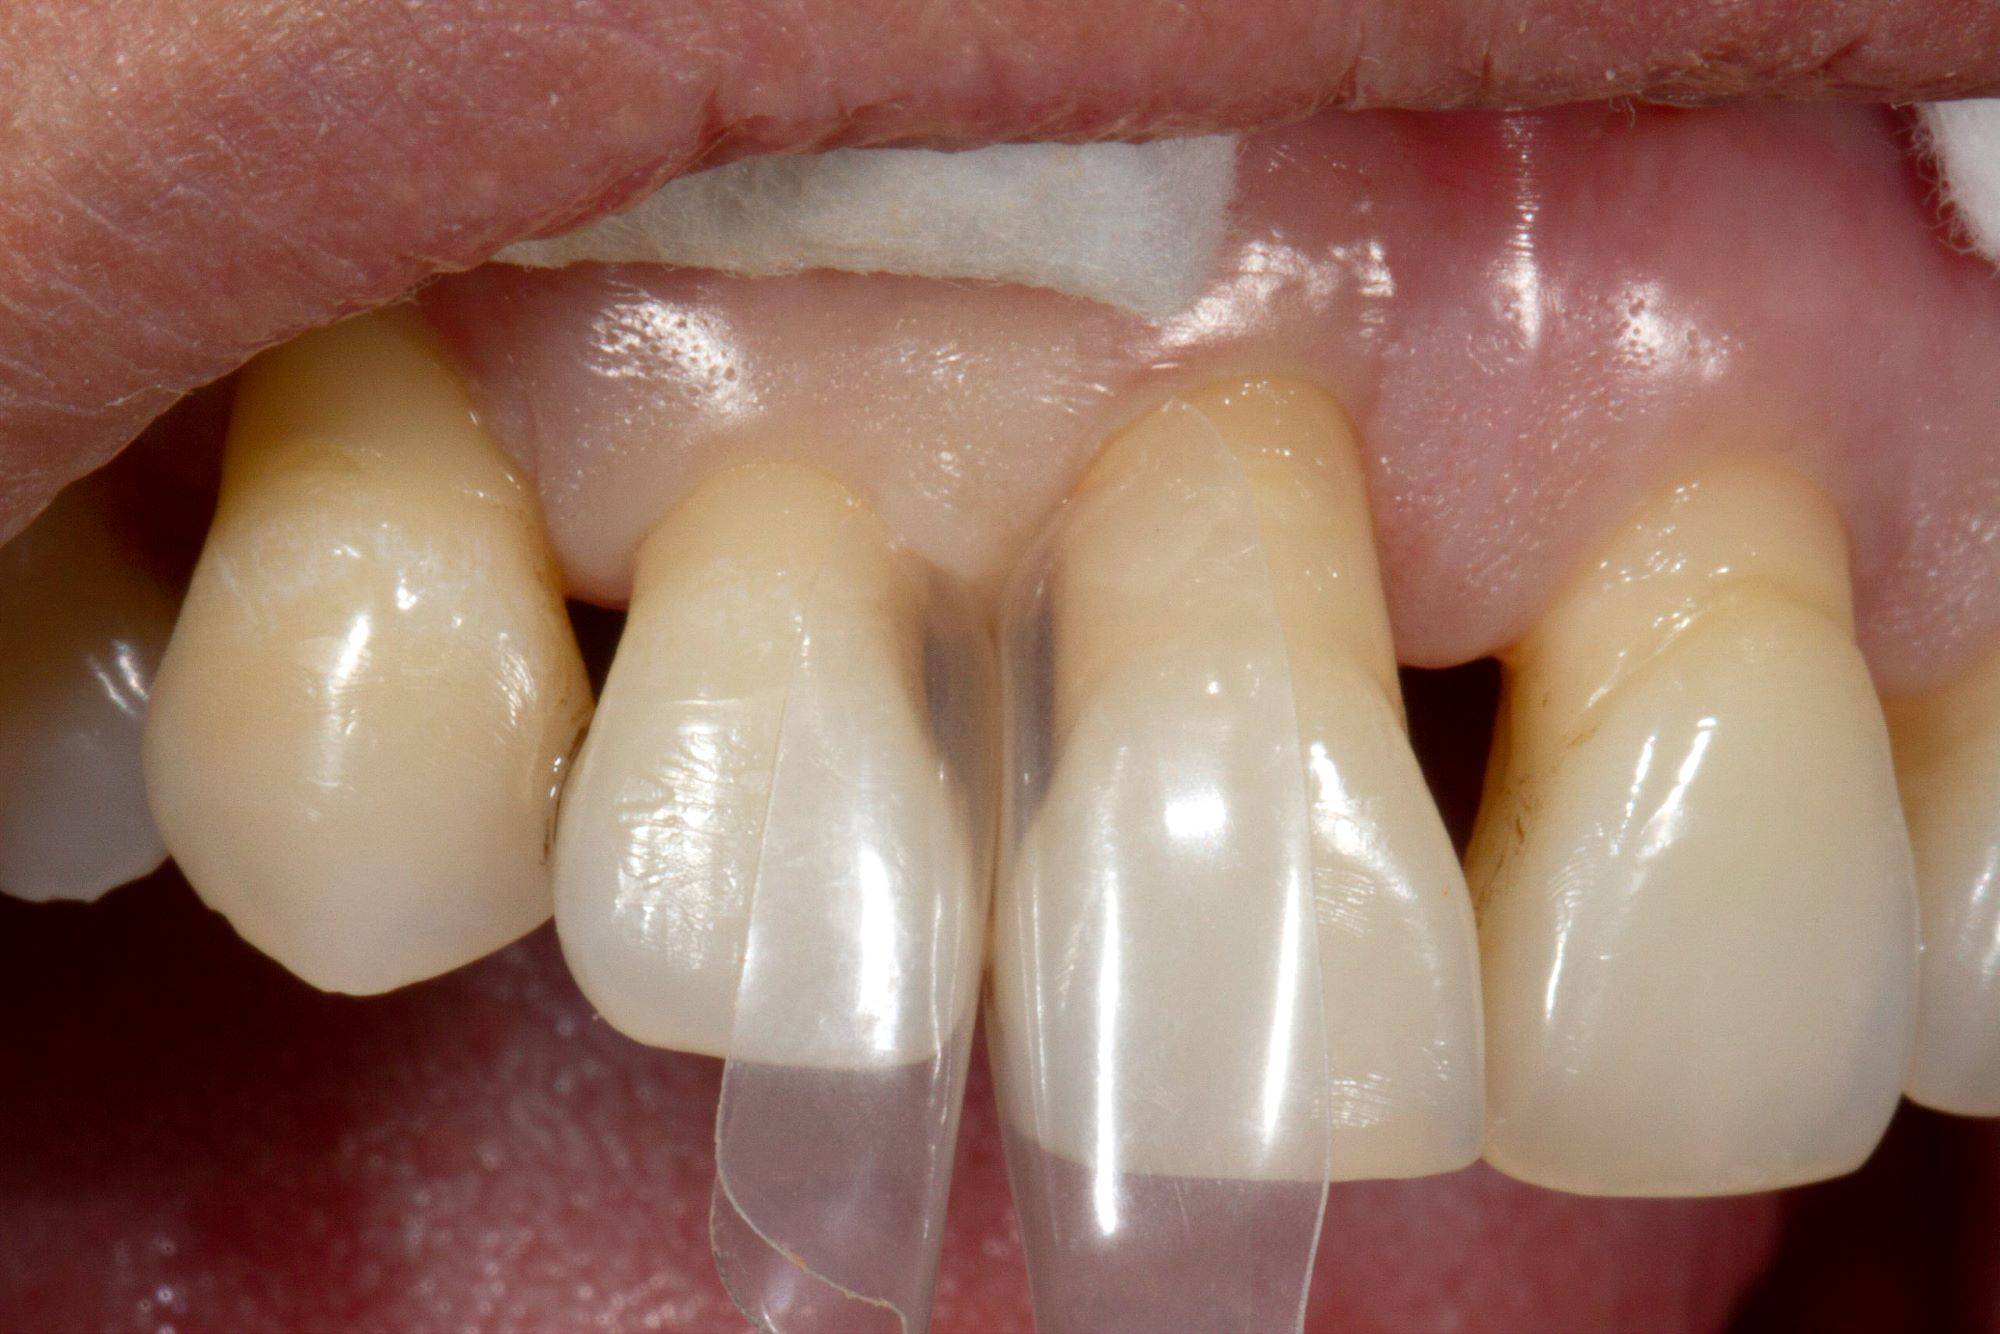 Matrix placed in lateral upper incisors